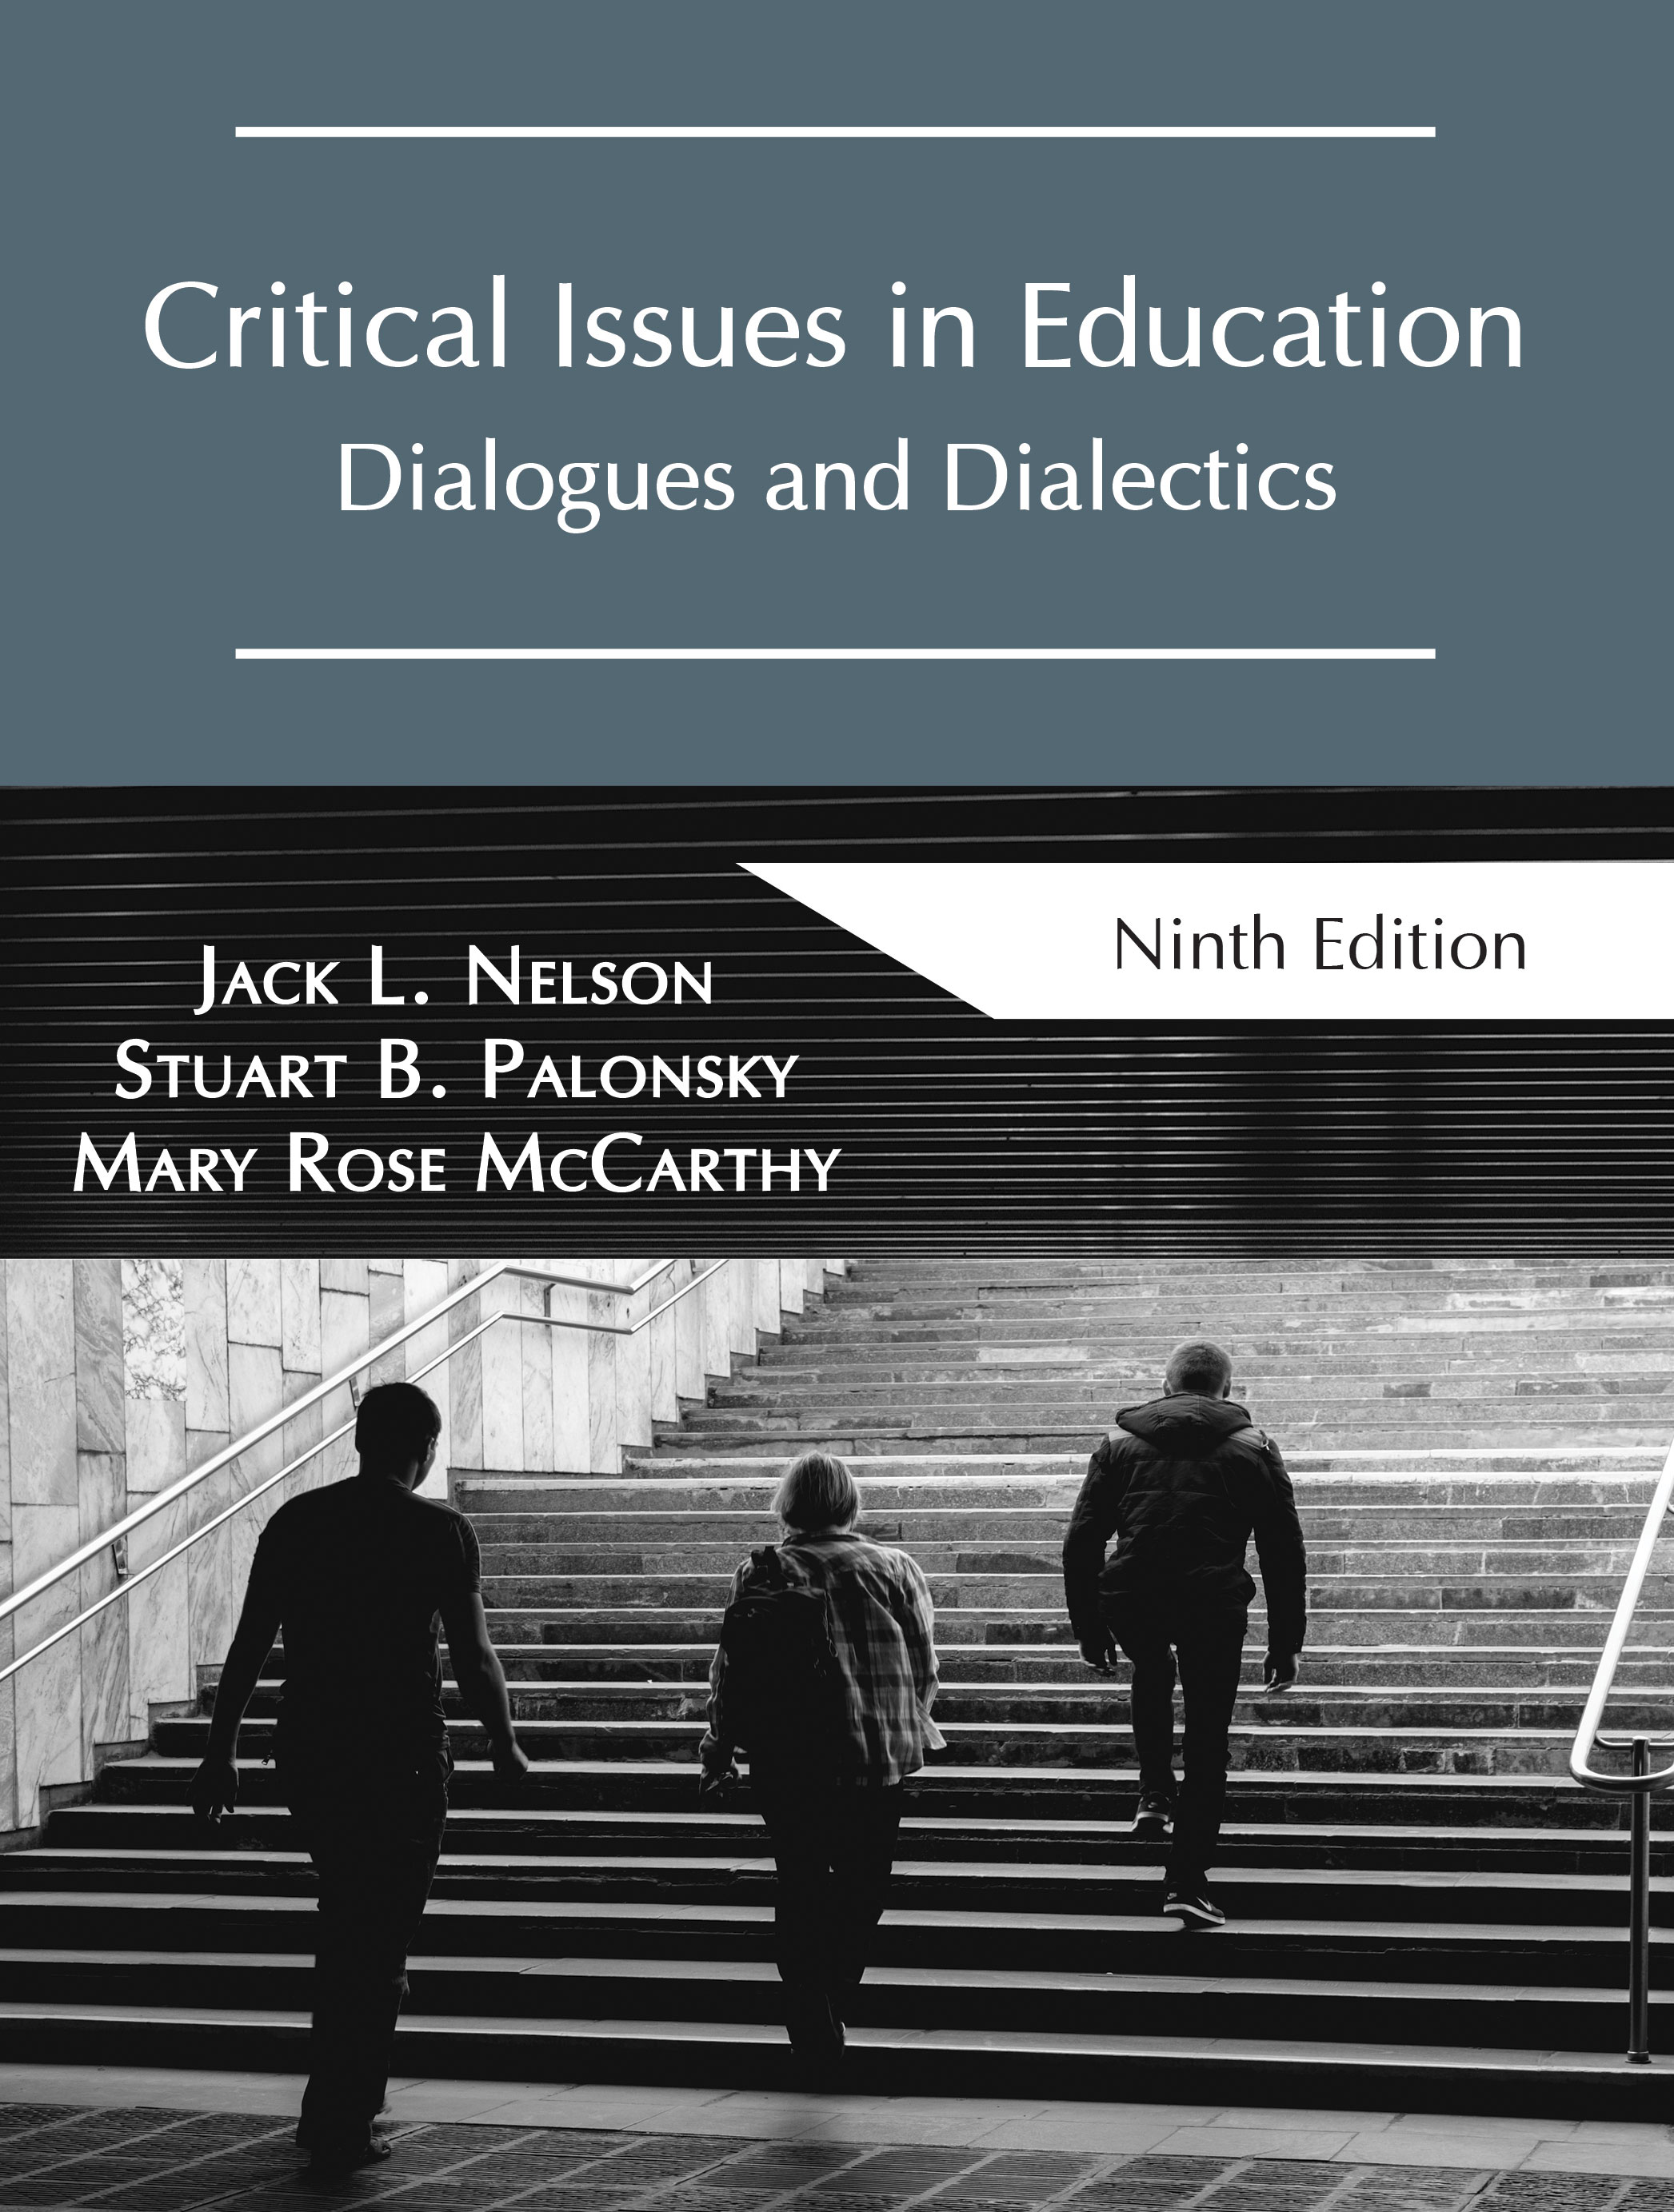 Critical Issues in Education: Dialogues and Dialectics, Ninth Edition by Jack L. Nelson, Stuart B. Palonsky, Mary Rose McCarthy